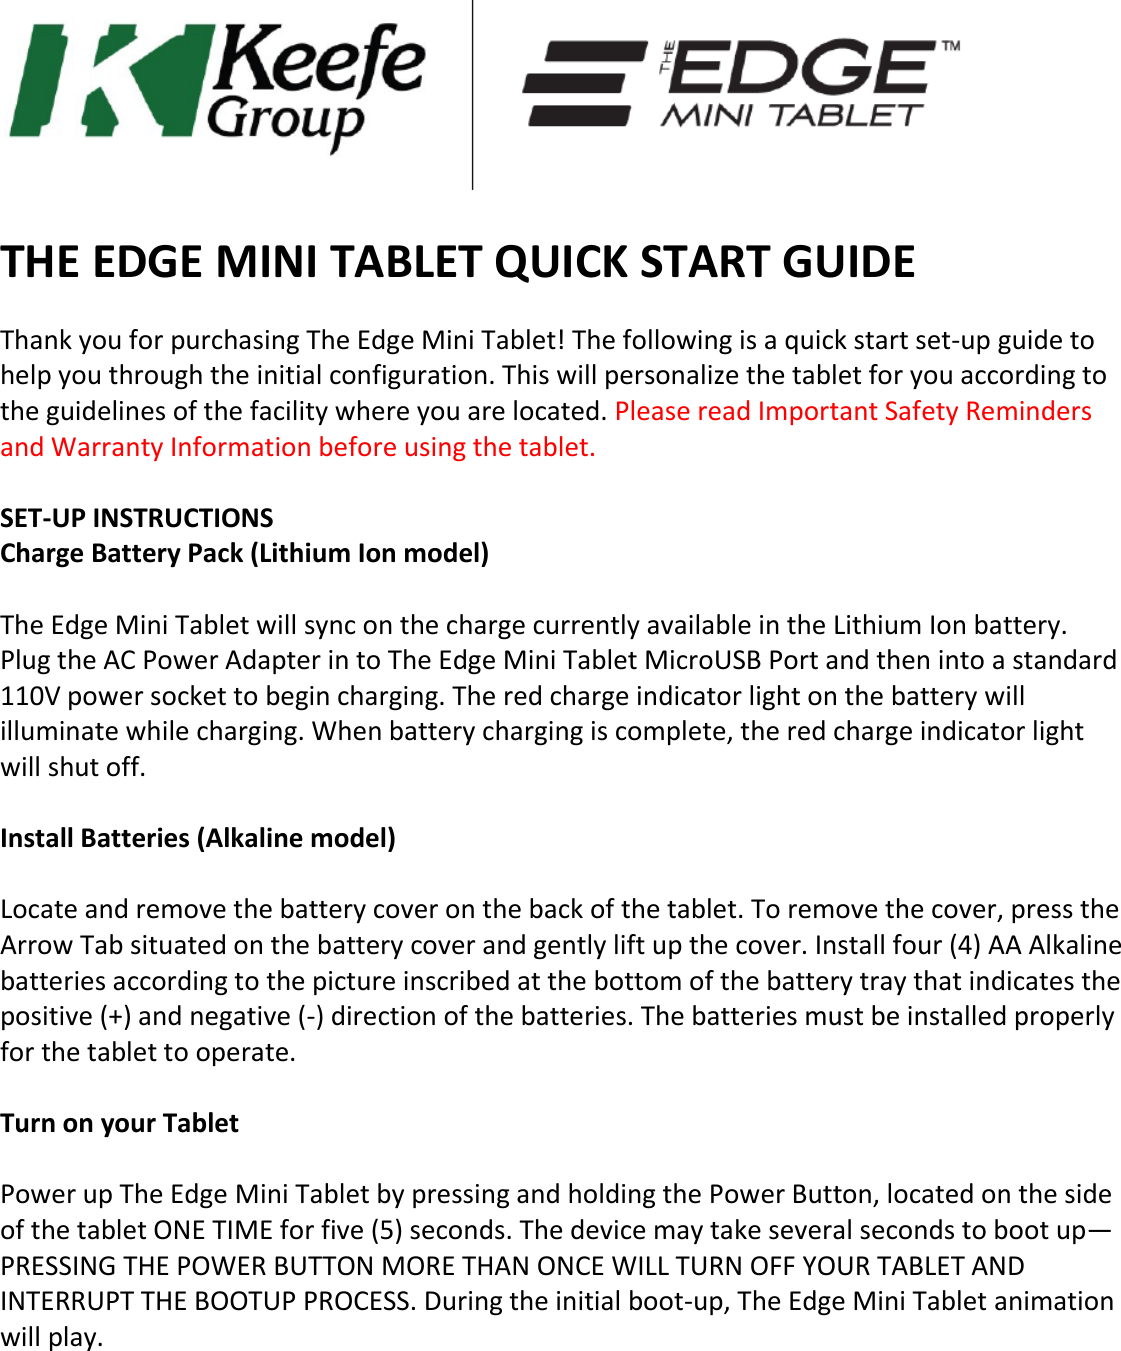   THE EDGE MINI TABLET QUICK START GUIDE   Thank you for purchasing The Edge Mini Tablet! The following is a quick start set-up guide to help you through the initial configuration. This will personalize the tablet for you according to the guidelines of the facility where you are located. Please read Important Safety Reminders and Warranty Information before using the tablet.   SET-UP INSTRUCTIONS  Charge Battery Pack (Lithium Ion model)   The Edge Mini Tablet will sync on the charge currently available in the Lithium Ion battery. Plug the AC Power Adapter in to The Edge Mini Tablet MicroUSB Port and then into a standard 110V power socket to begin charging. The red charge indicator light on the battery will illuminate while charging. When battery charging is complete, the red charge indicator light will shut off.   Install Batteries (Alkaline model)   Locate and remove the battery cover on the back of the tablet. To remove the cover, press the Arrow Tab situated on the battery cover and gently lift up the cover. Install four (4) AA Alkaline batteries according to the picture inscribed at the bottom of the battery tray that indicates the positive (+) and negative (-) direction of the batteries. The batteries must be installed properly for the tablet to operate.   Turn on your Tablet   Power up The Edge Mini Tablet by pressing and holding the Power Button, located on the side of the tablet ONE TIME for five (5) seconds. The device may take several seconds to boot up—PRESSING THE POWER BUTTON MORE THAN ONCE WILL TURN OFF YOUR TABLET AND INTERRUPT THE BOOTUP PROCESS. During the initial boot-up, The Edge Mini Tablet animation will play.      